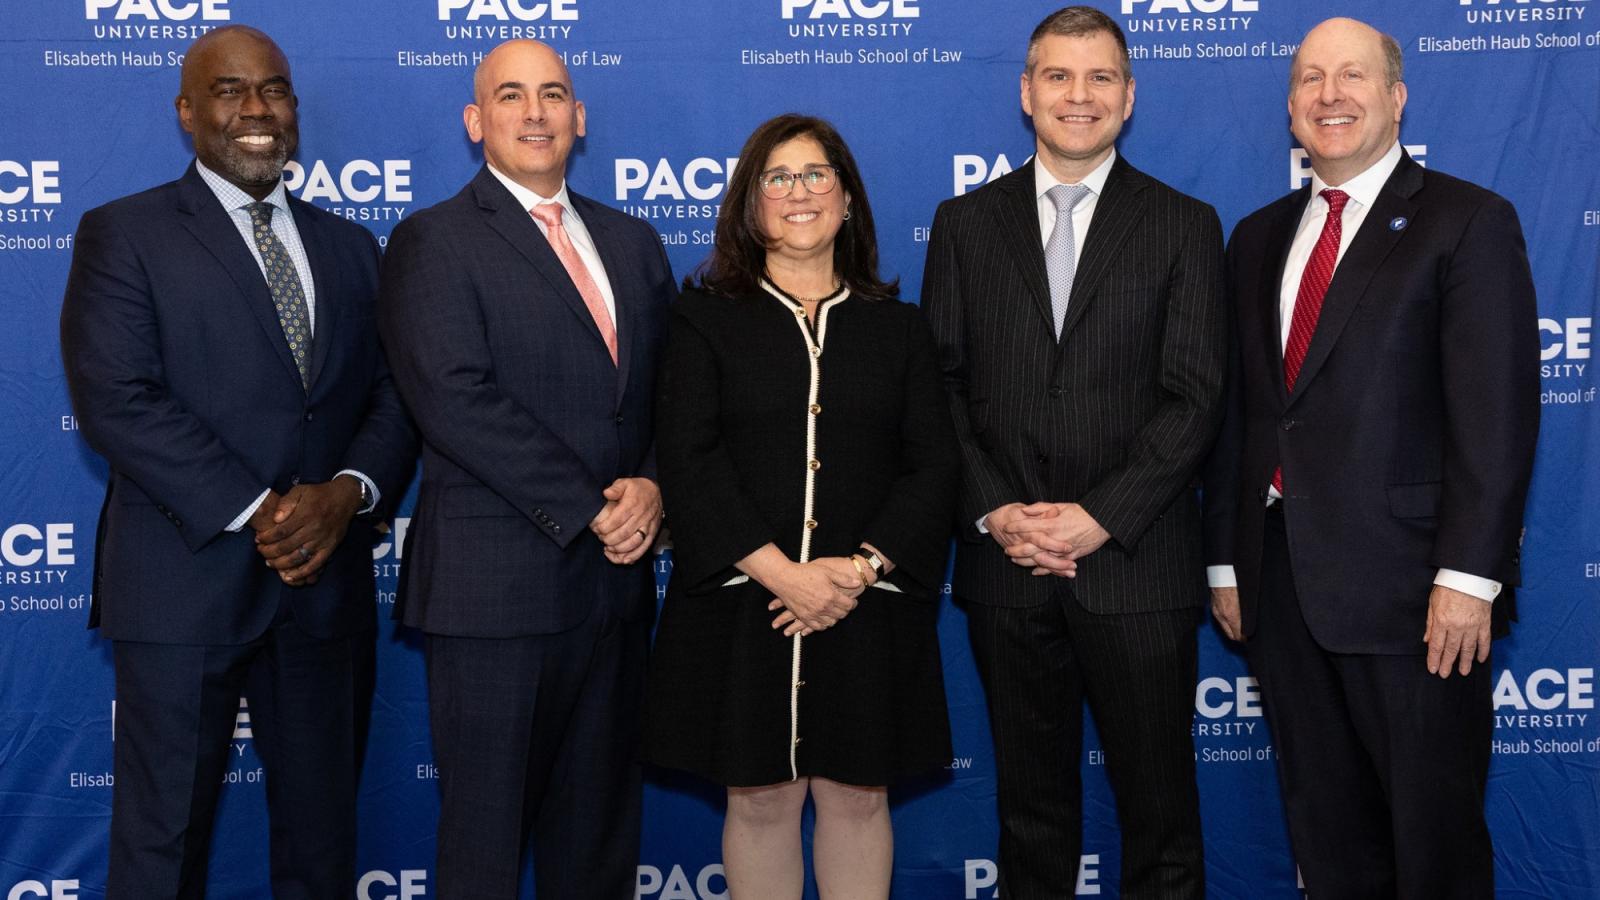 Elisabeth Haub School of Law at Pace University Leadership Dinner honorees pictured with Dean Horace Anderson and President Marvin Krislov